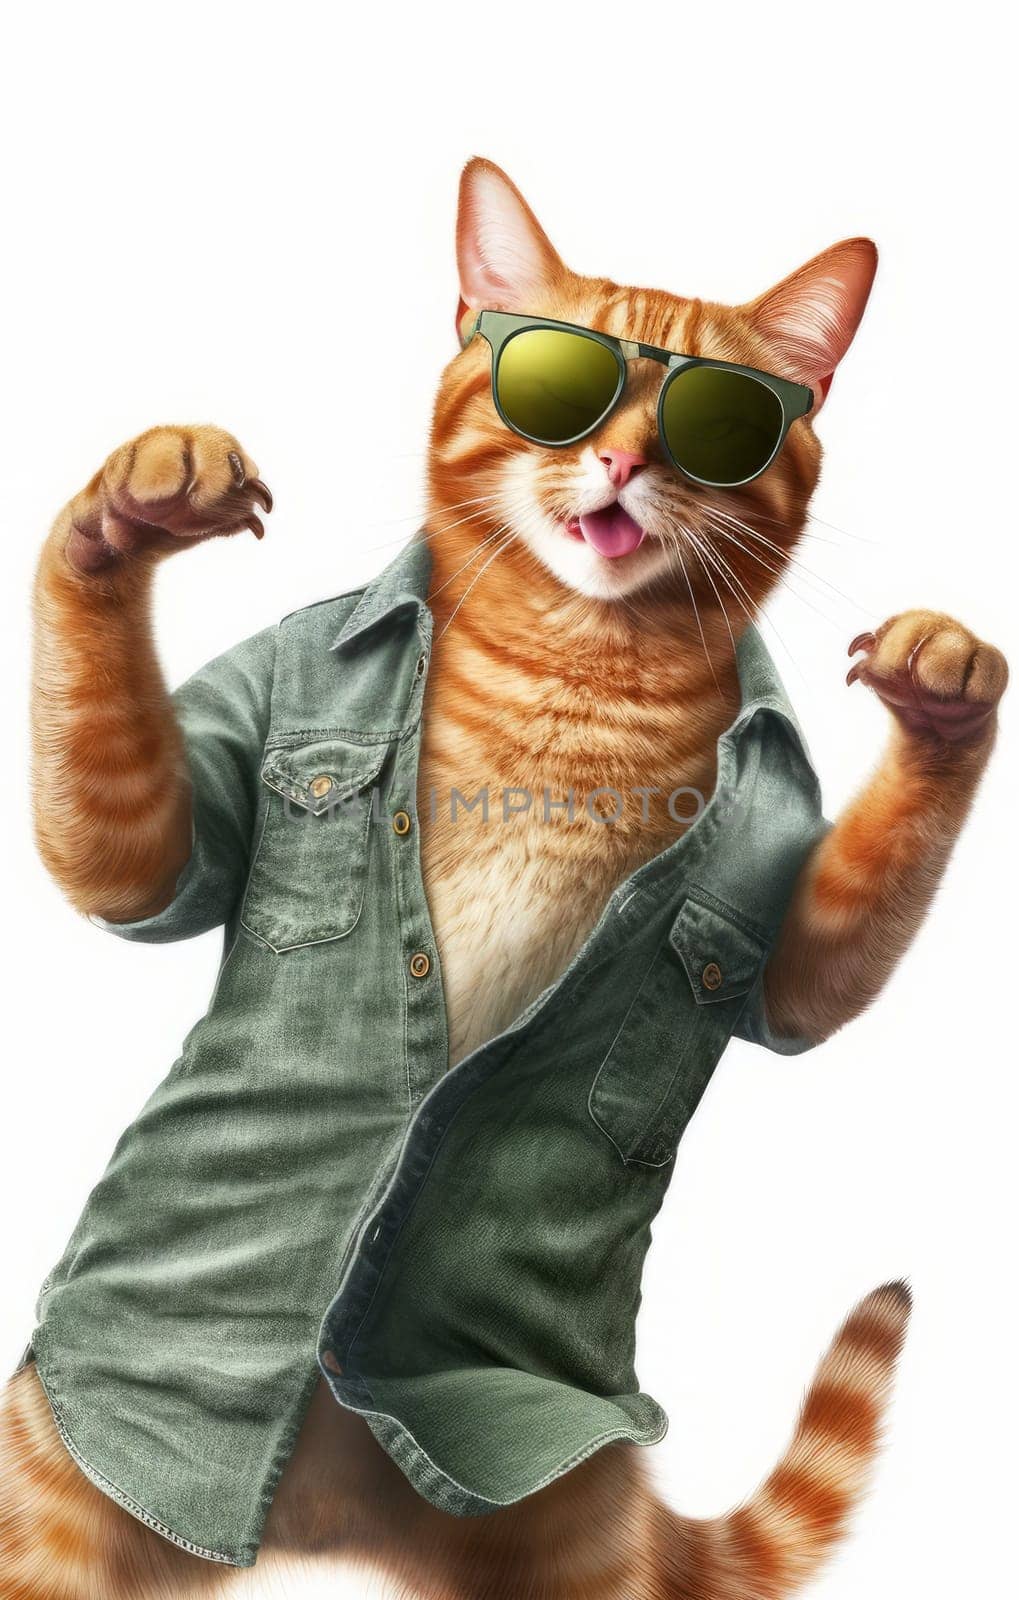 Cute ginger cat in a denim shirt and sunglasses standing on a white background.